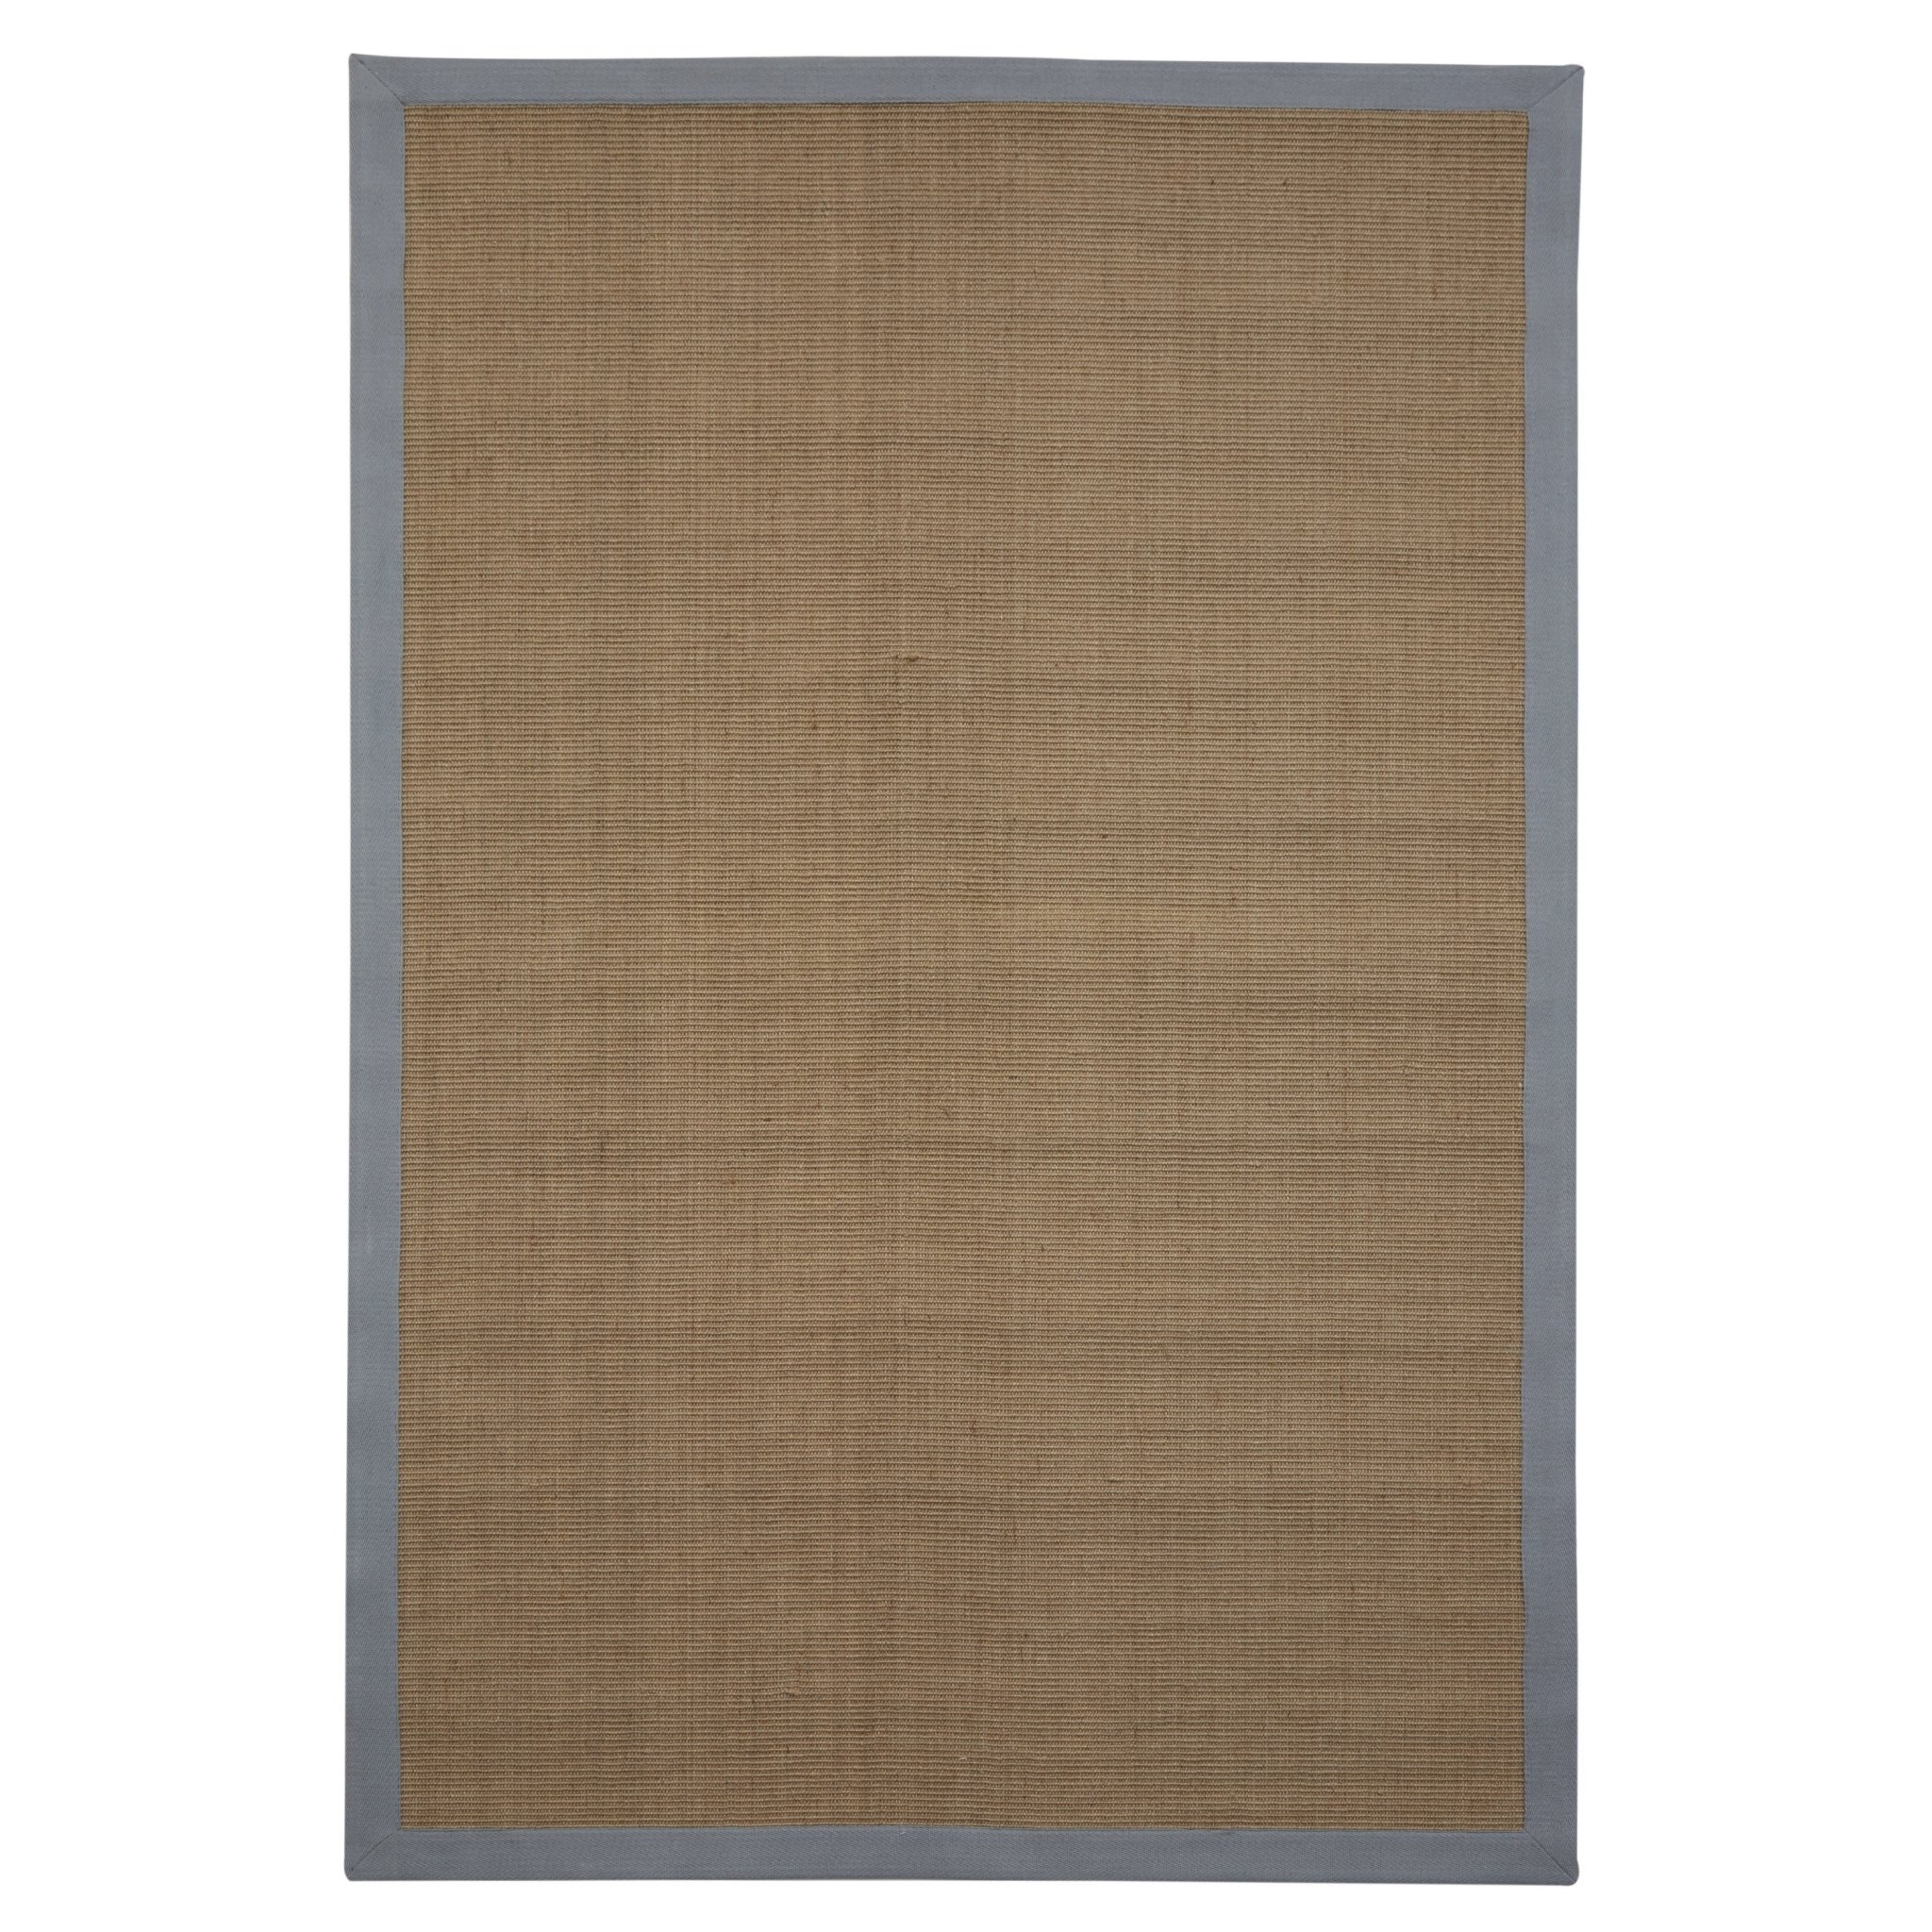 Chelsea Jute Rug with Cotton Grey Border 150x240cm by Native Home & Lifestyle – Furniture & Homeware – The Luxe Home